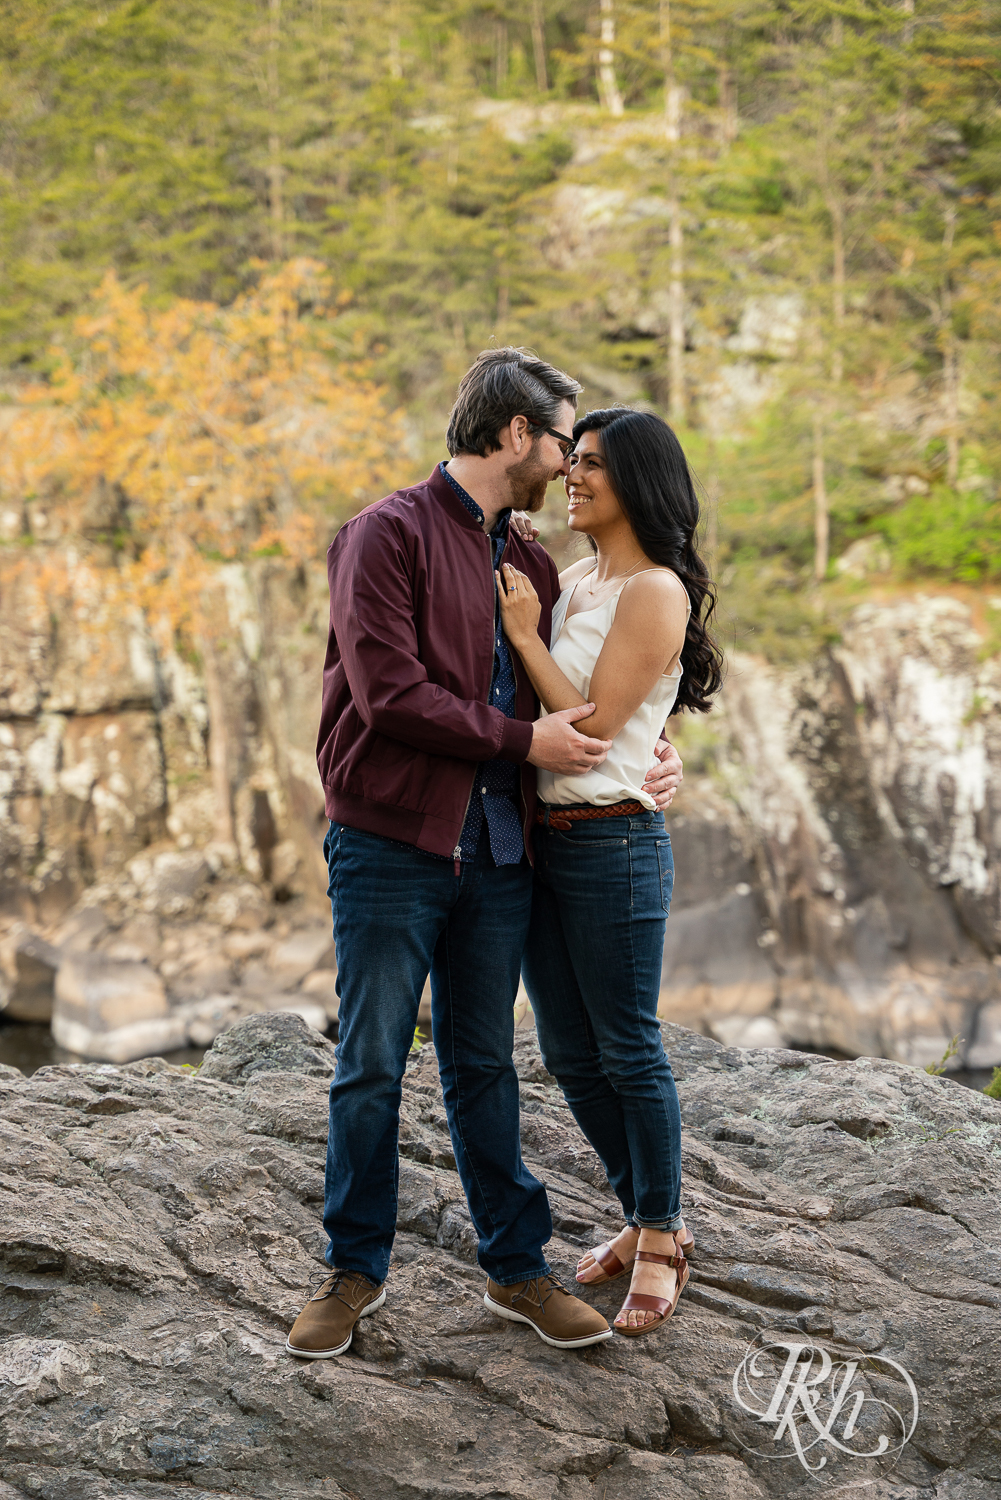 Man and woman in jeans laugh on cliff at Interstate State Park in Taylor's Fall, Minnesota.